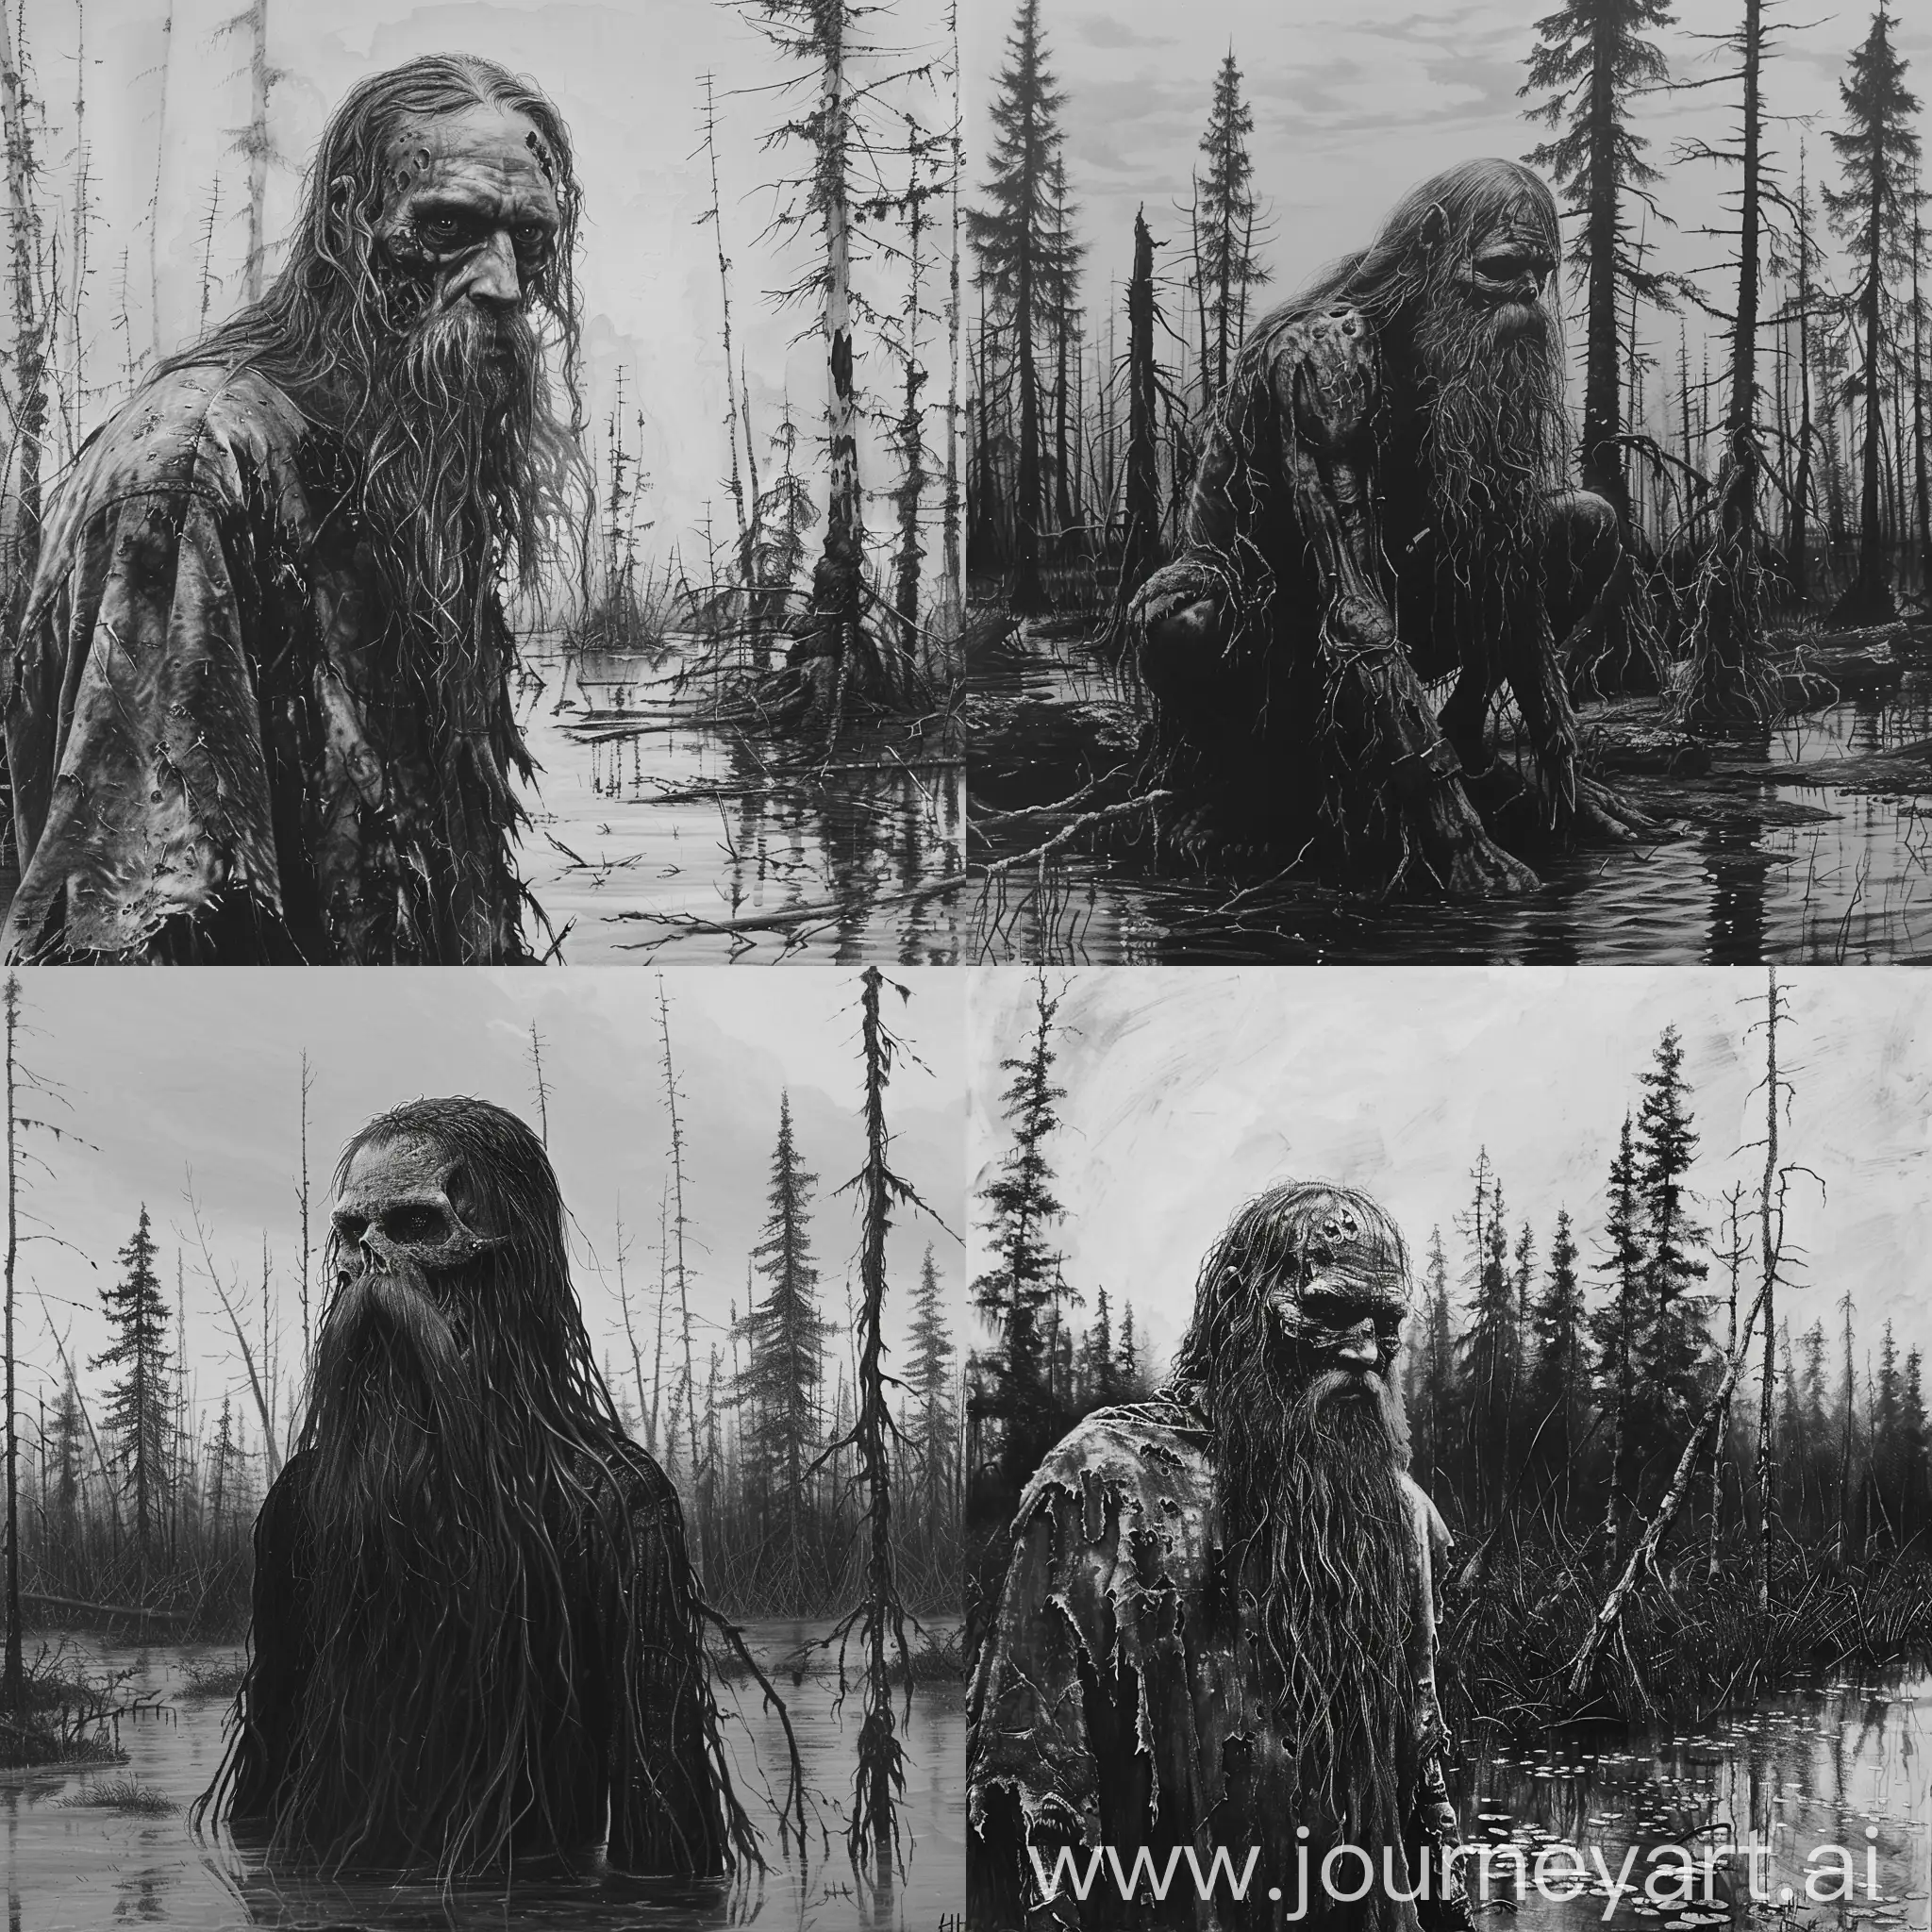 Eerie-Taiga-Swamp-Encounter-Zombie-Survivalist-with-Beard-and-Sparse-Hair